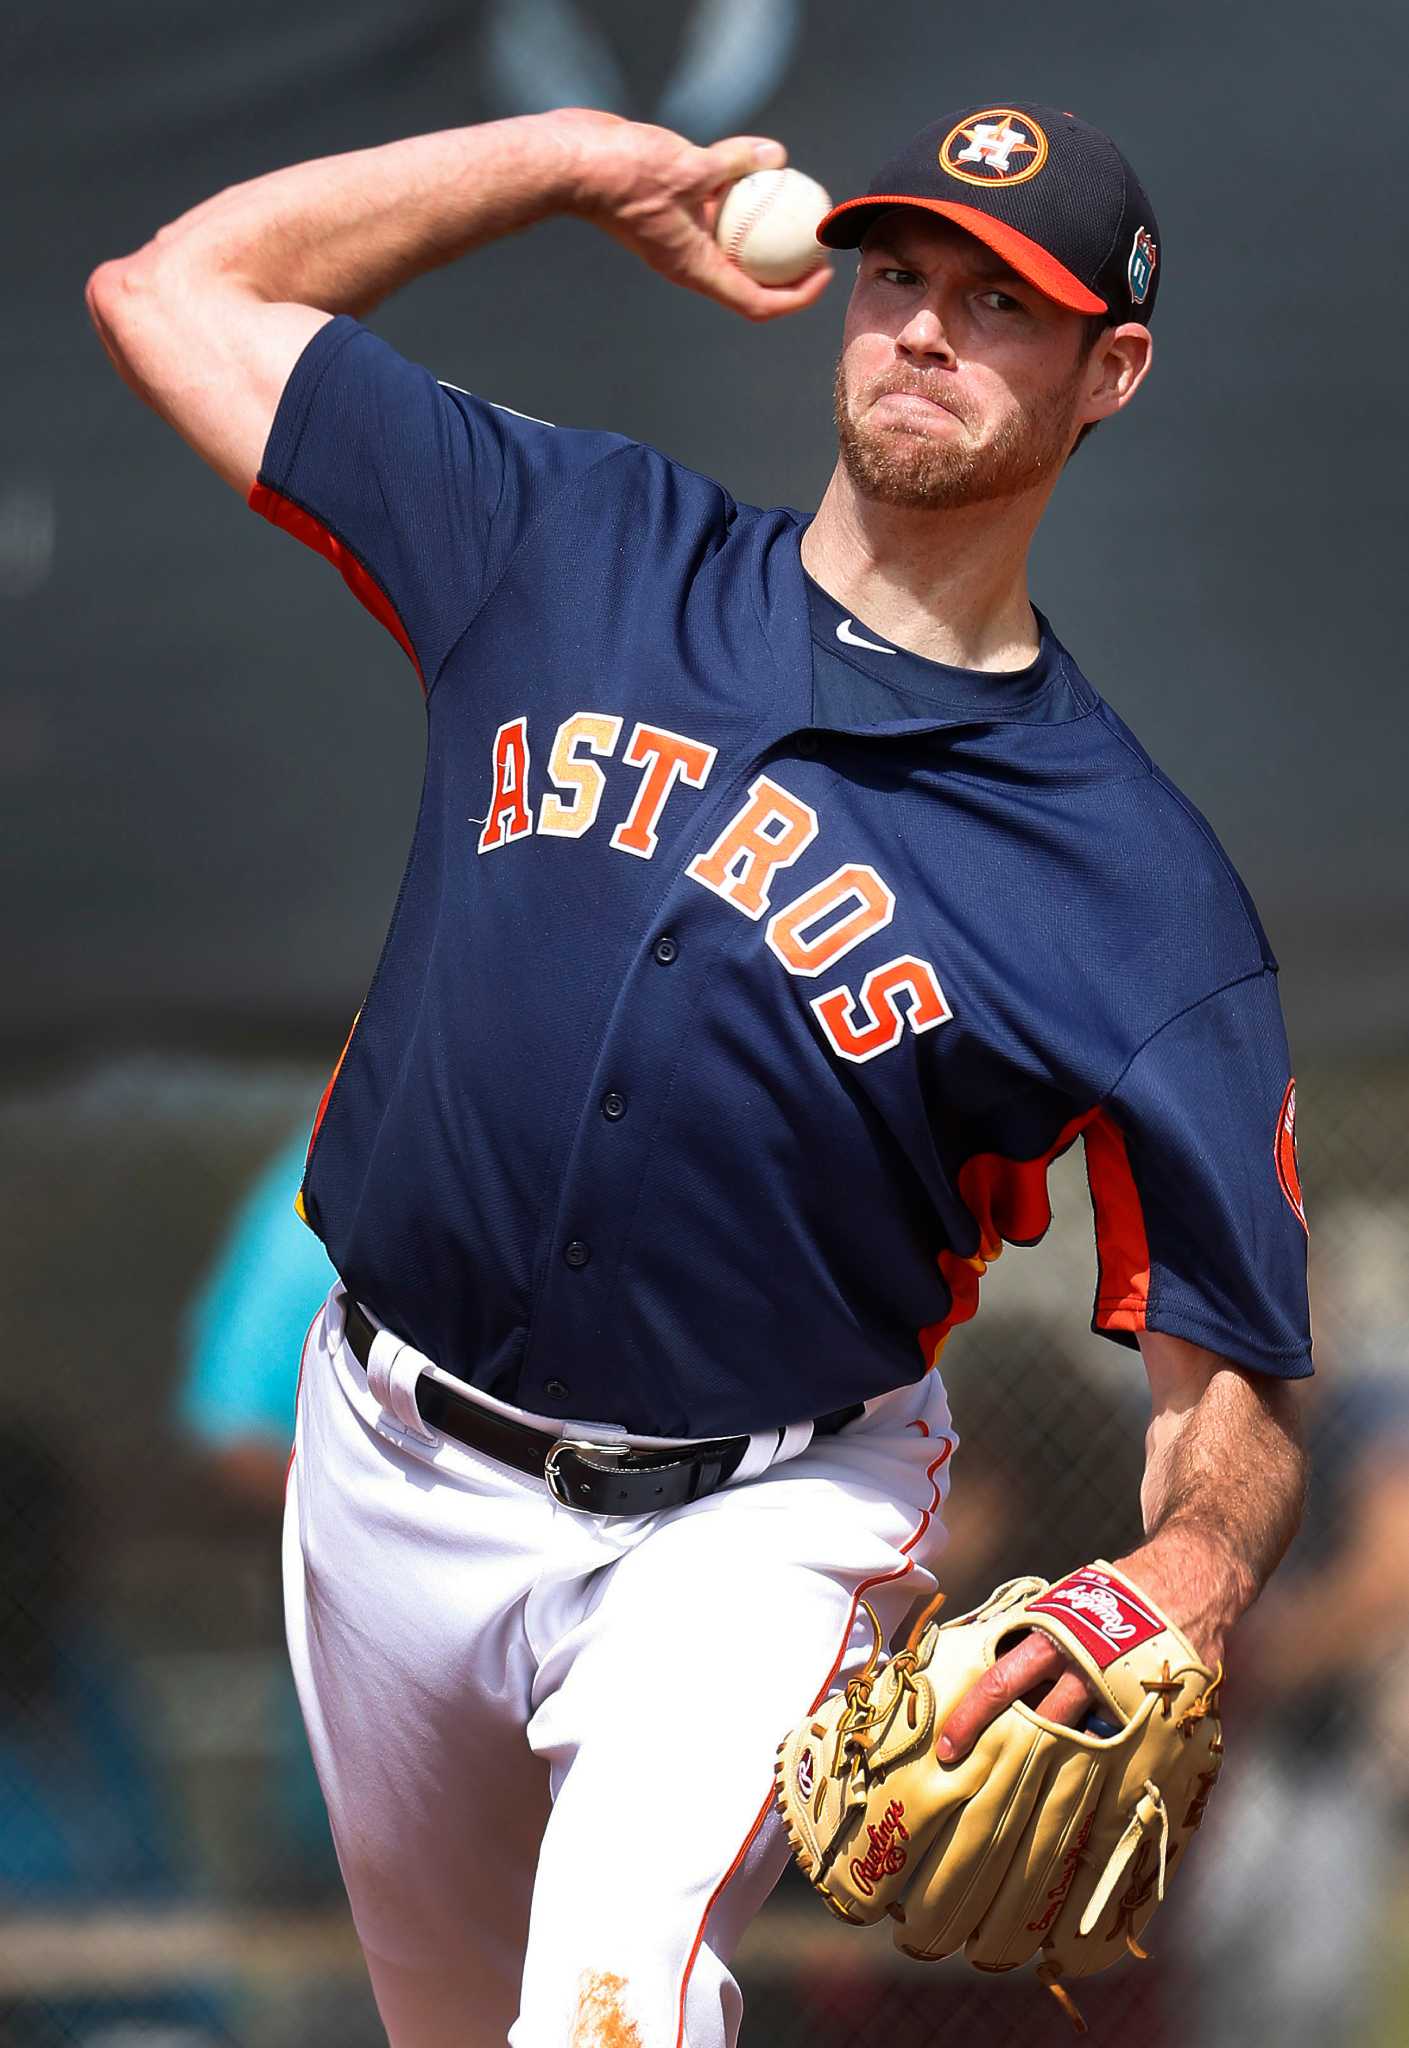 Doug Fister Has Another Strong Spring Outing For Astros